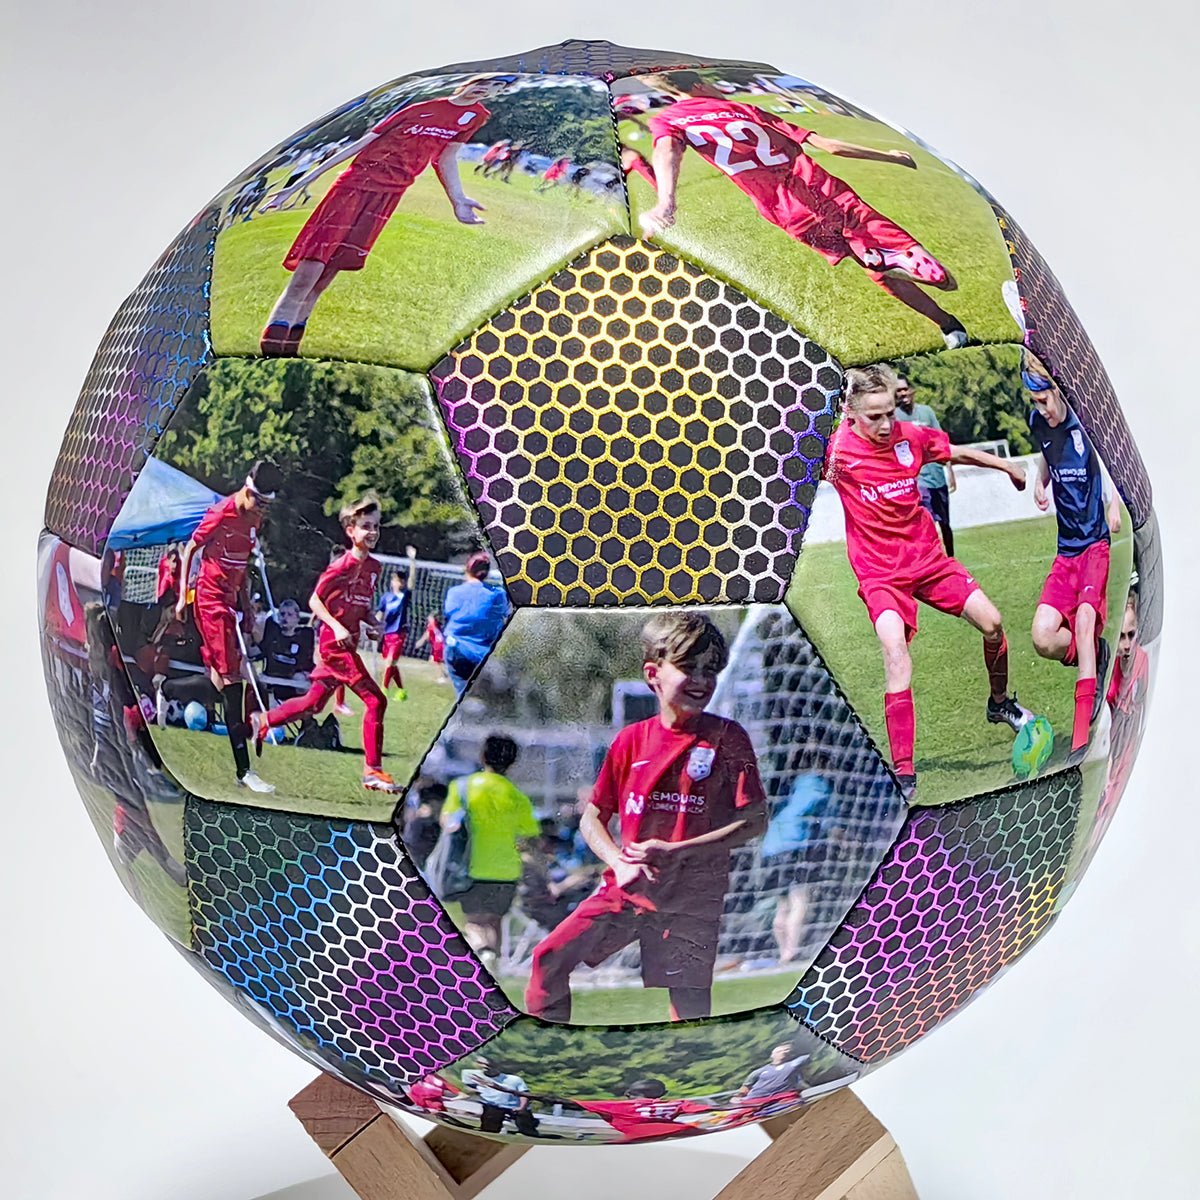 Personalized Custom Holographic Reflective Soccer Ball - Family Watchs